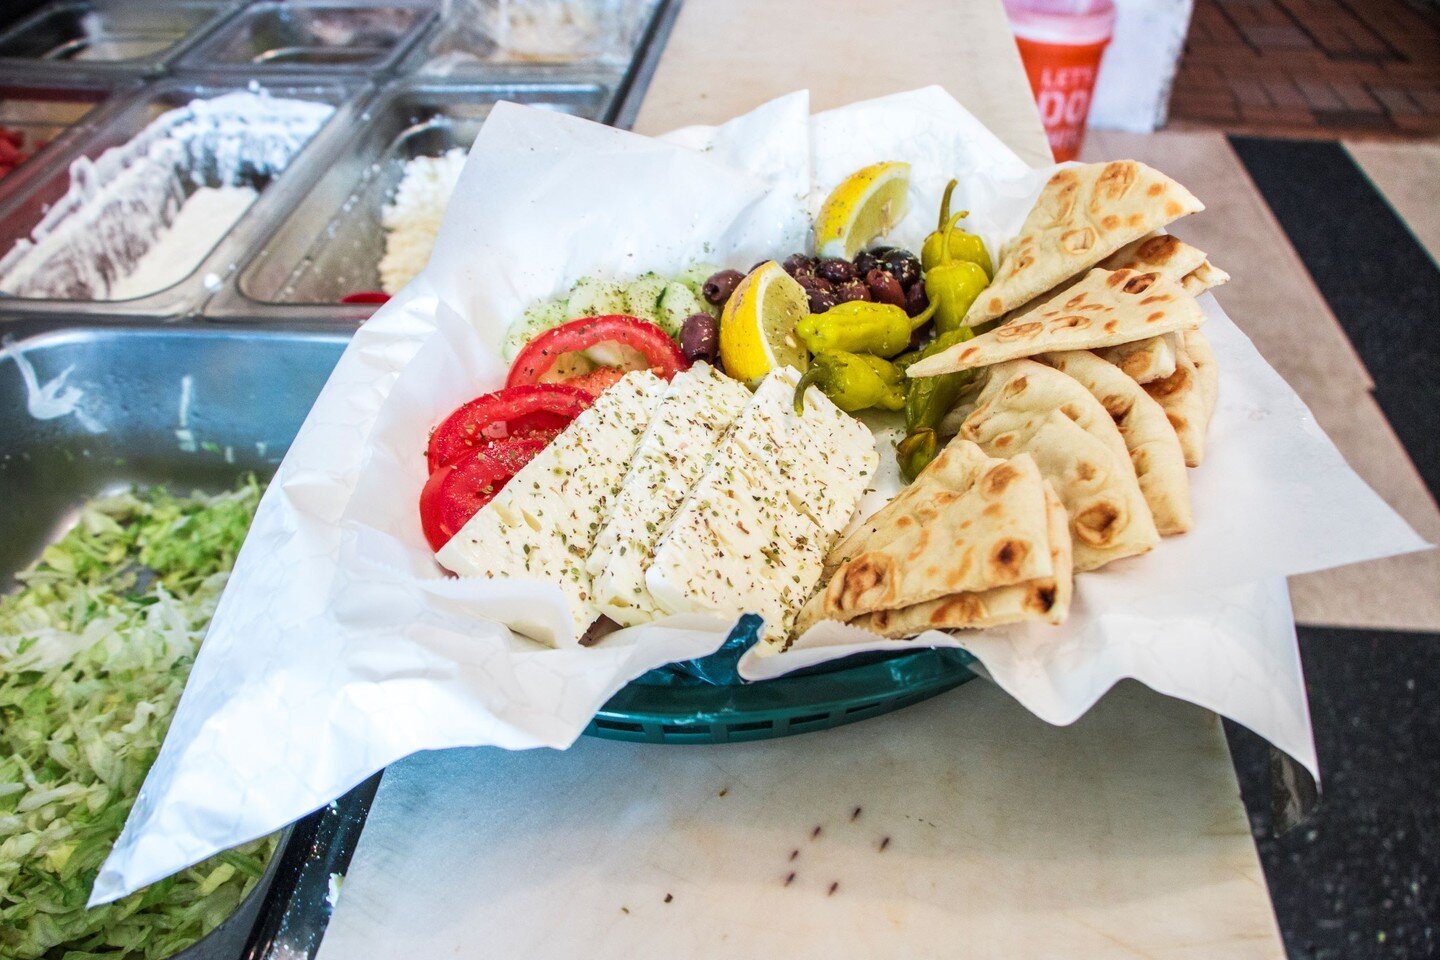 The Feta &amp; Olivia Appetizer plate has a little bit of everything, perfect for sharing. Add a side of hummus or tzatziki to make it even better.

#vinnies #stl #eatstl #foodie #stlouisfoods #stlfoods #greek #italian #lindenwoodpark #sandwiches #sp